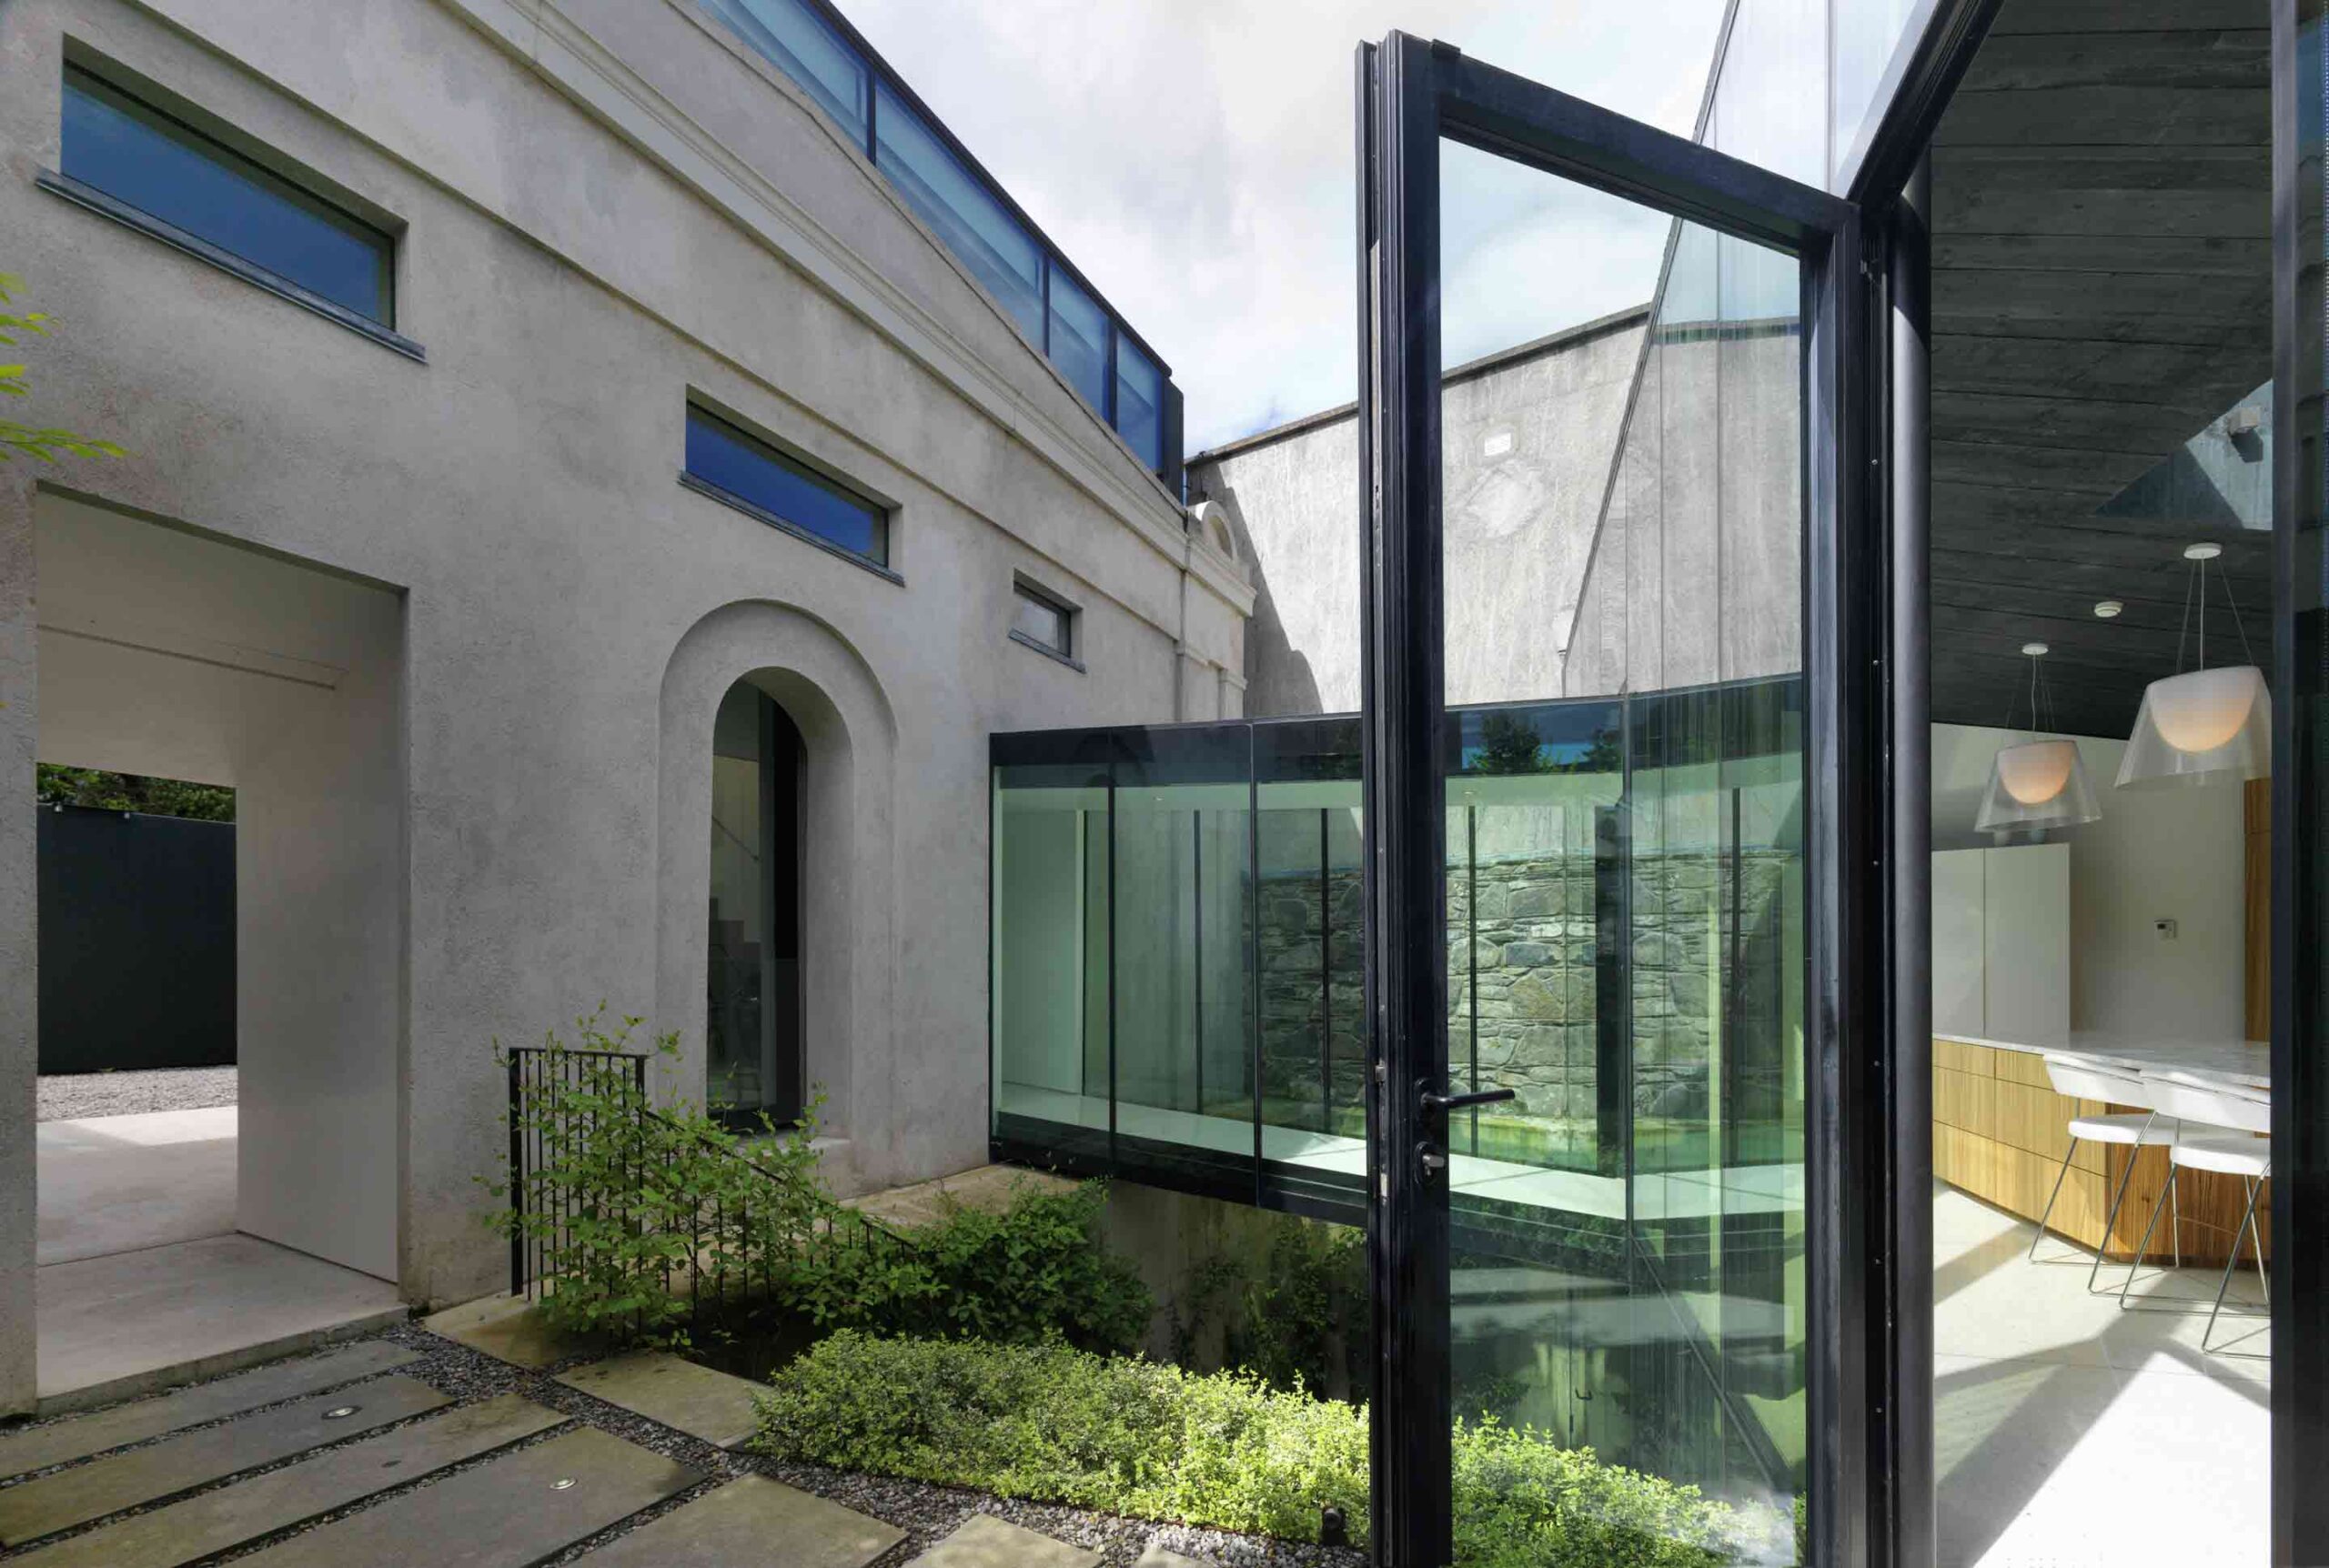 Flynn Mews House by Lorcan O’Herlihy Architects [LOHA]